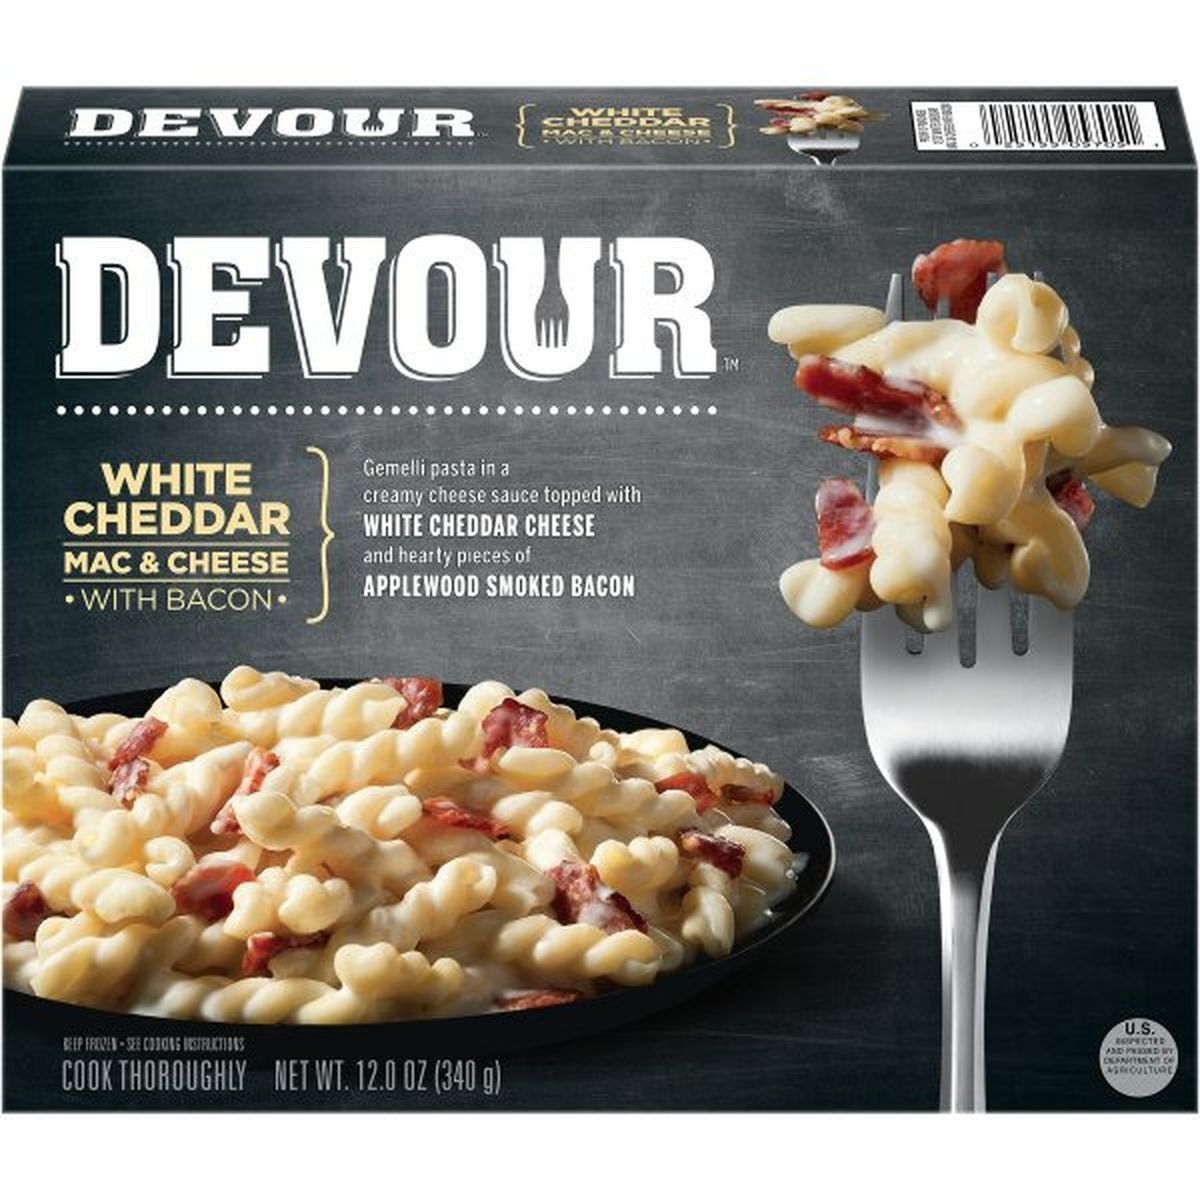 Calories in Devour White Cheddar Mac & Cheese with Bacon